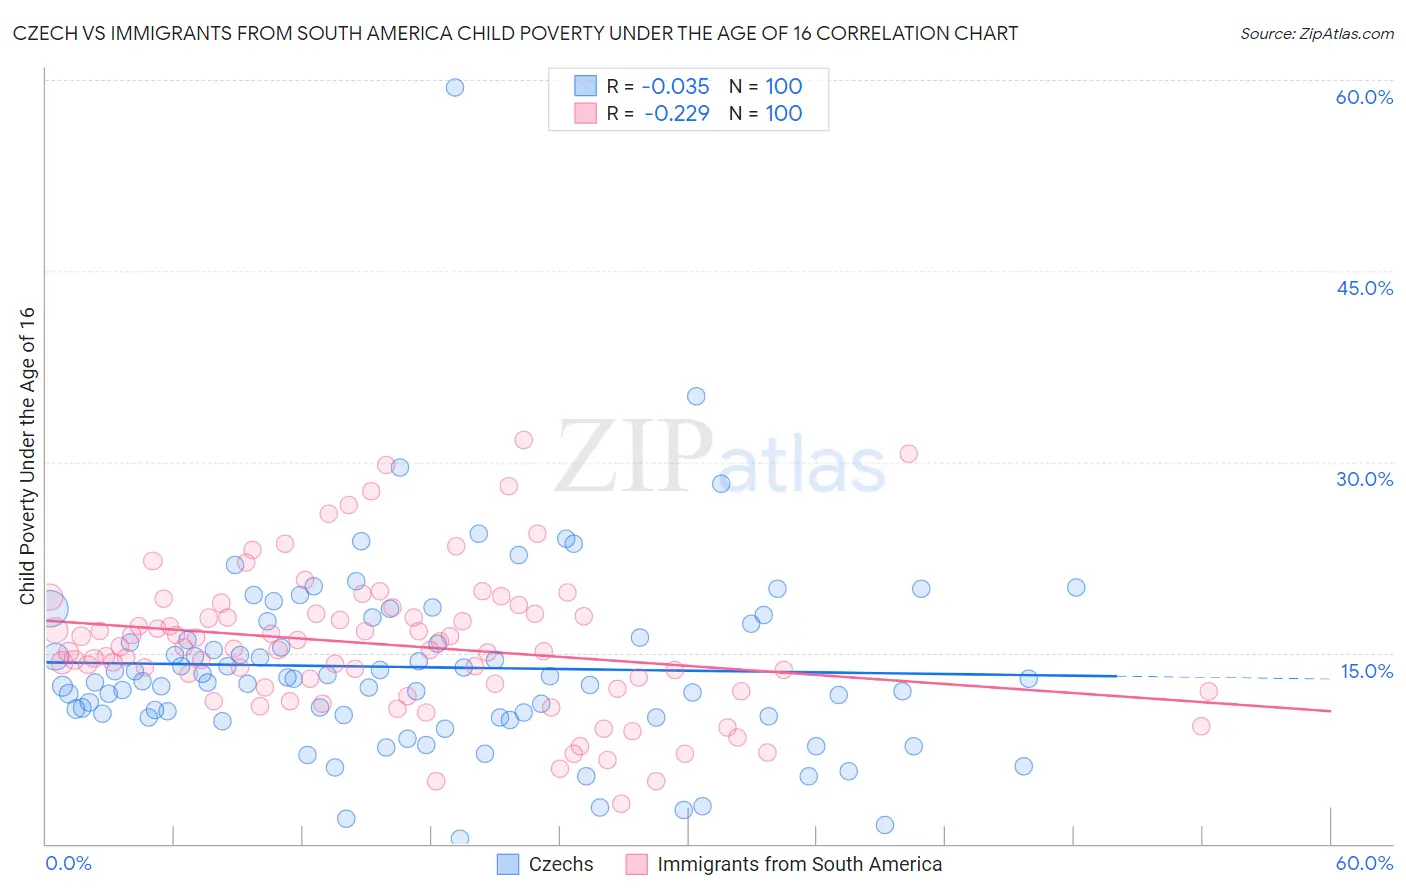 Czech vs Immigrants from South America Child Poverty Under the Age of 16